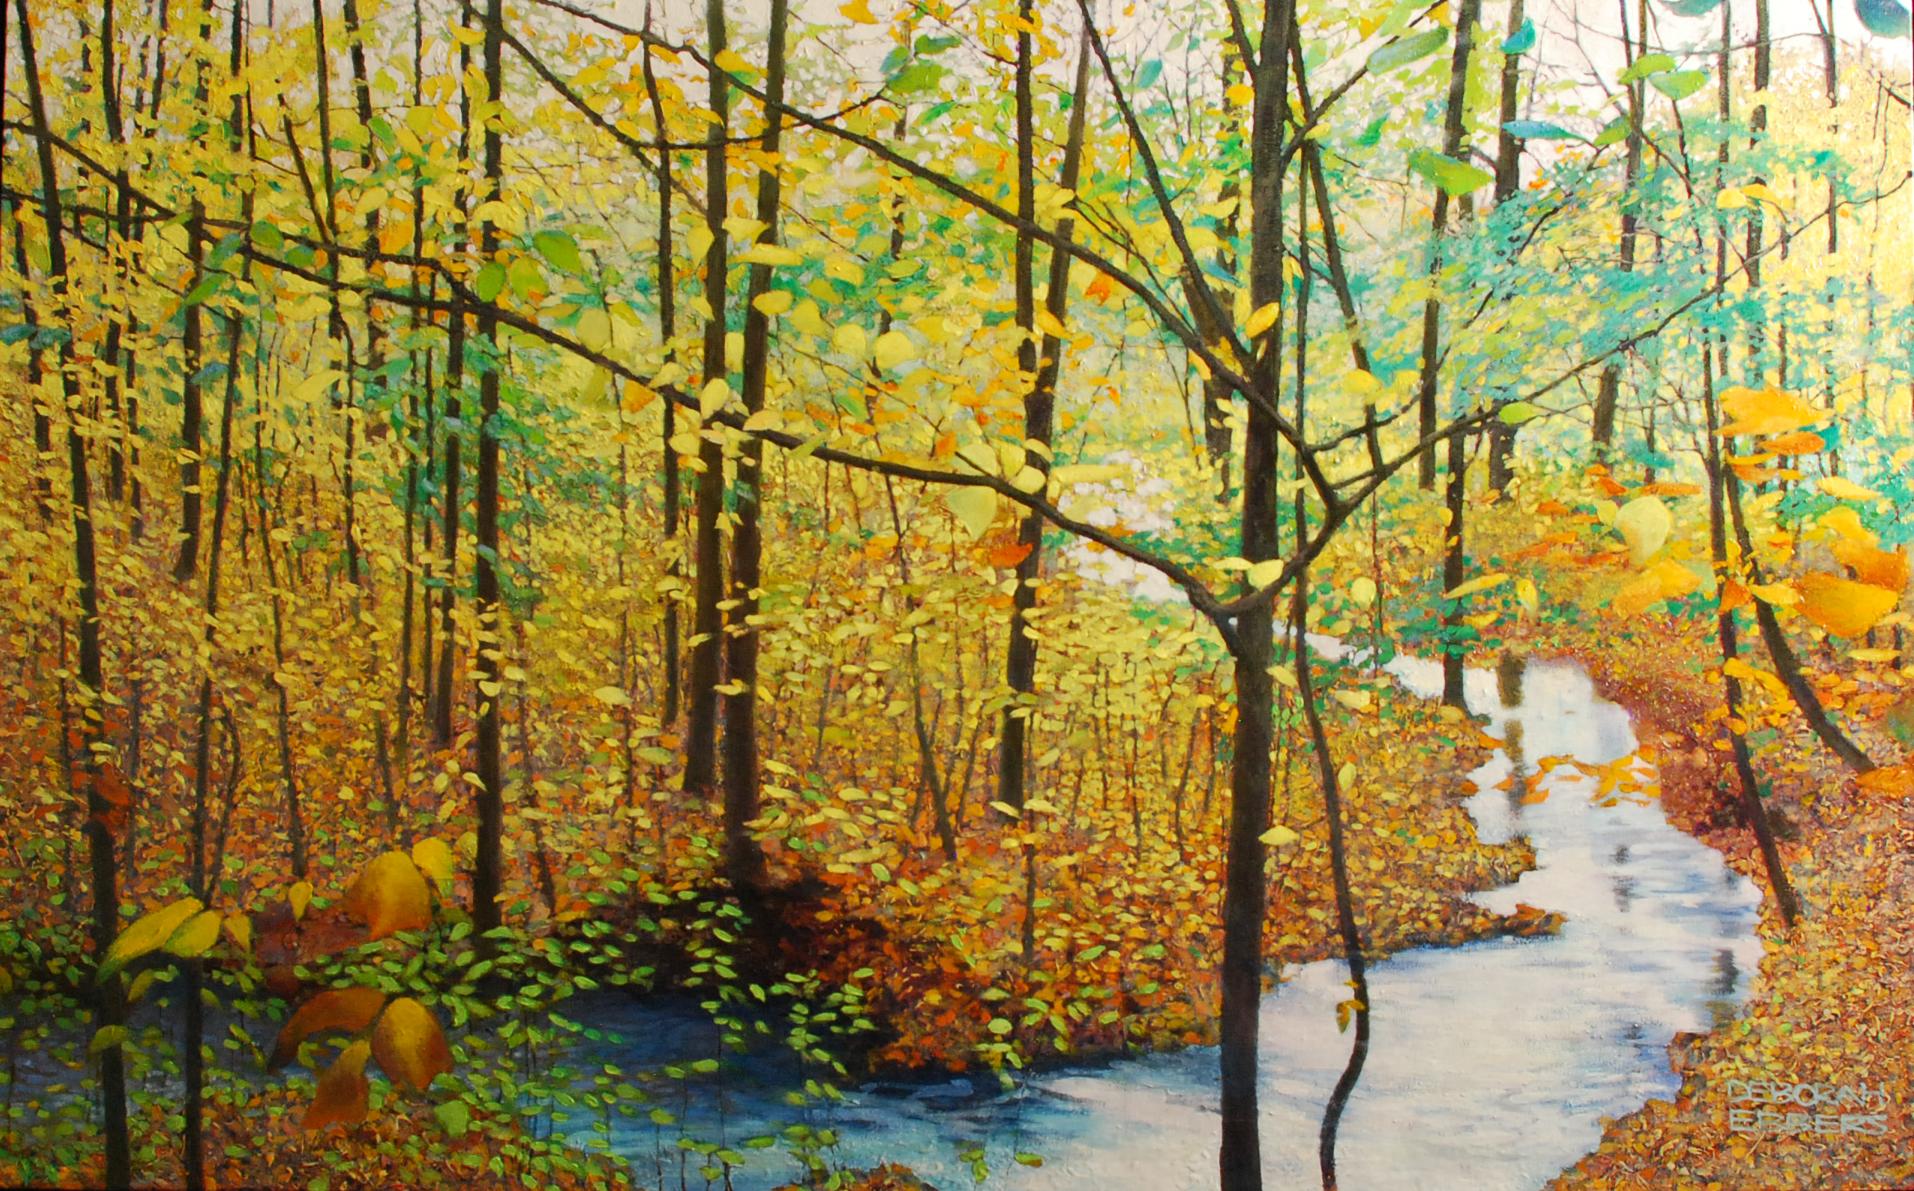 Deborah Ebbers Landscape Painting - The Turning - Original Oil Painting of Stream and Trees with Leaf Covered Forest